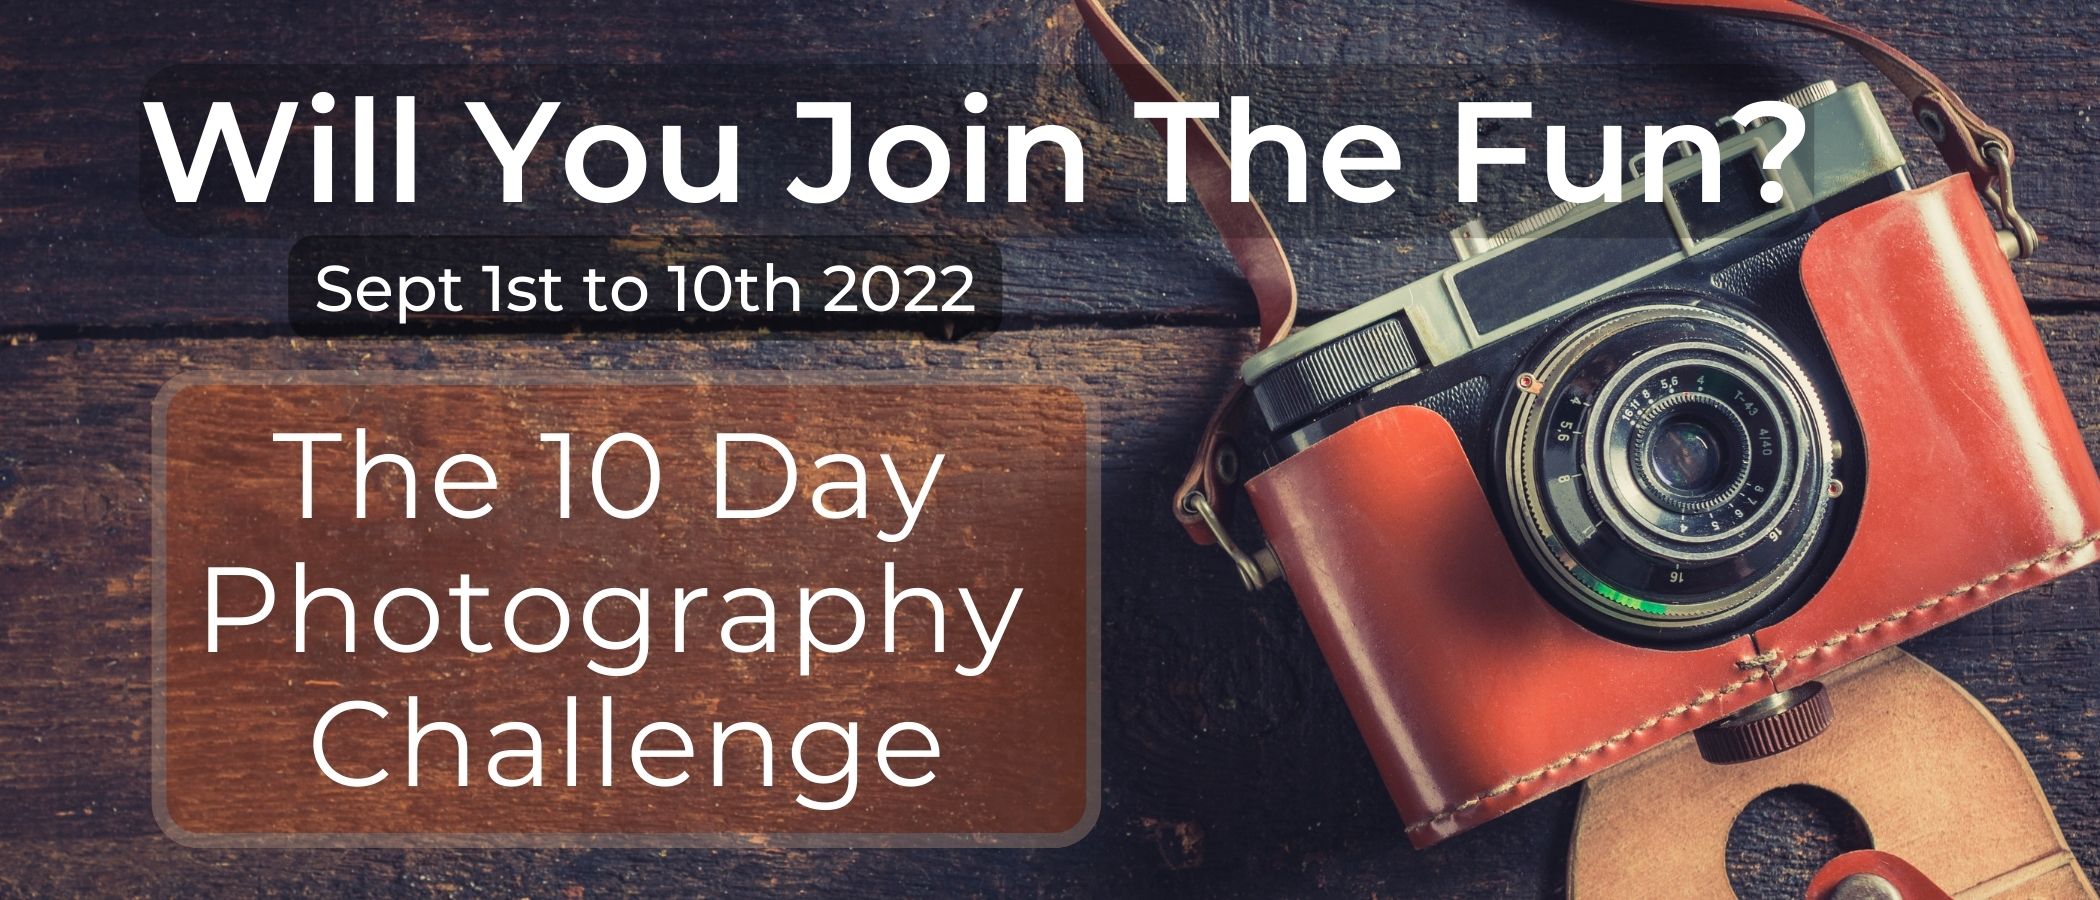 A vintage Camera banner for the 10 day photography challenge